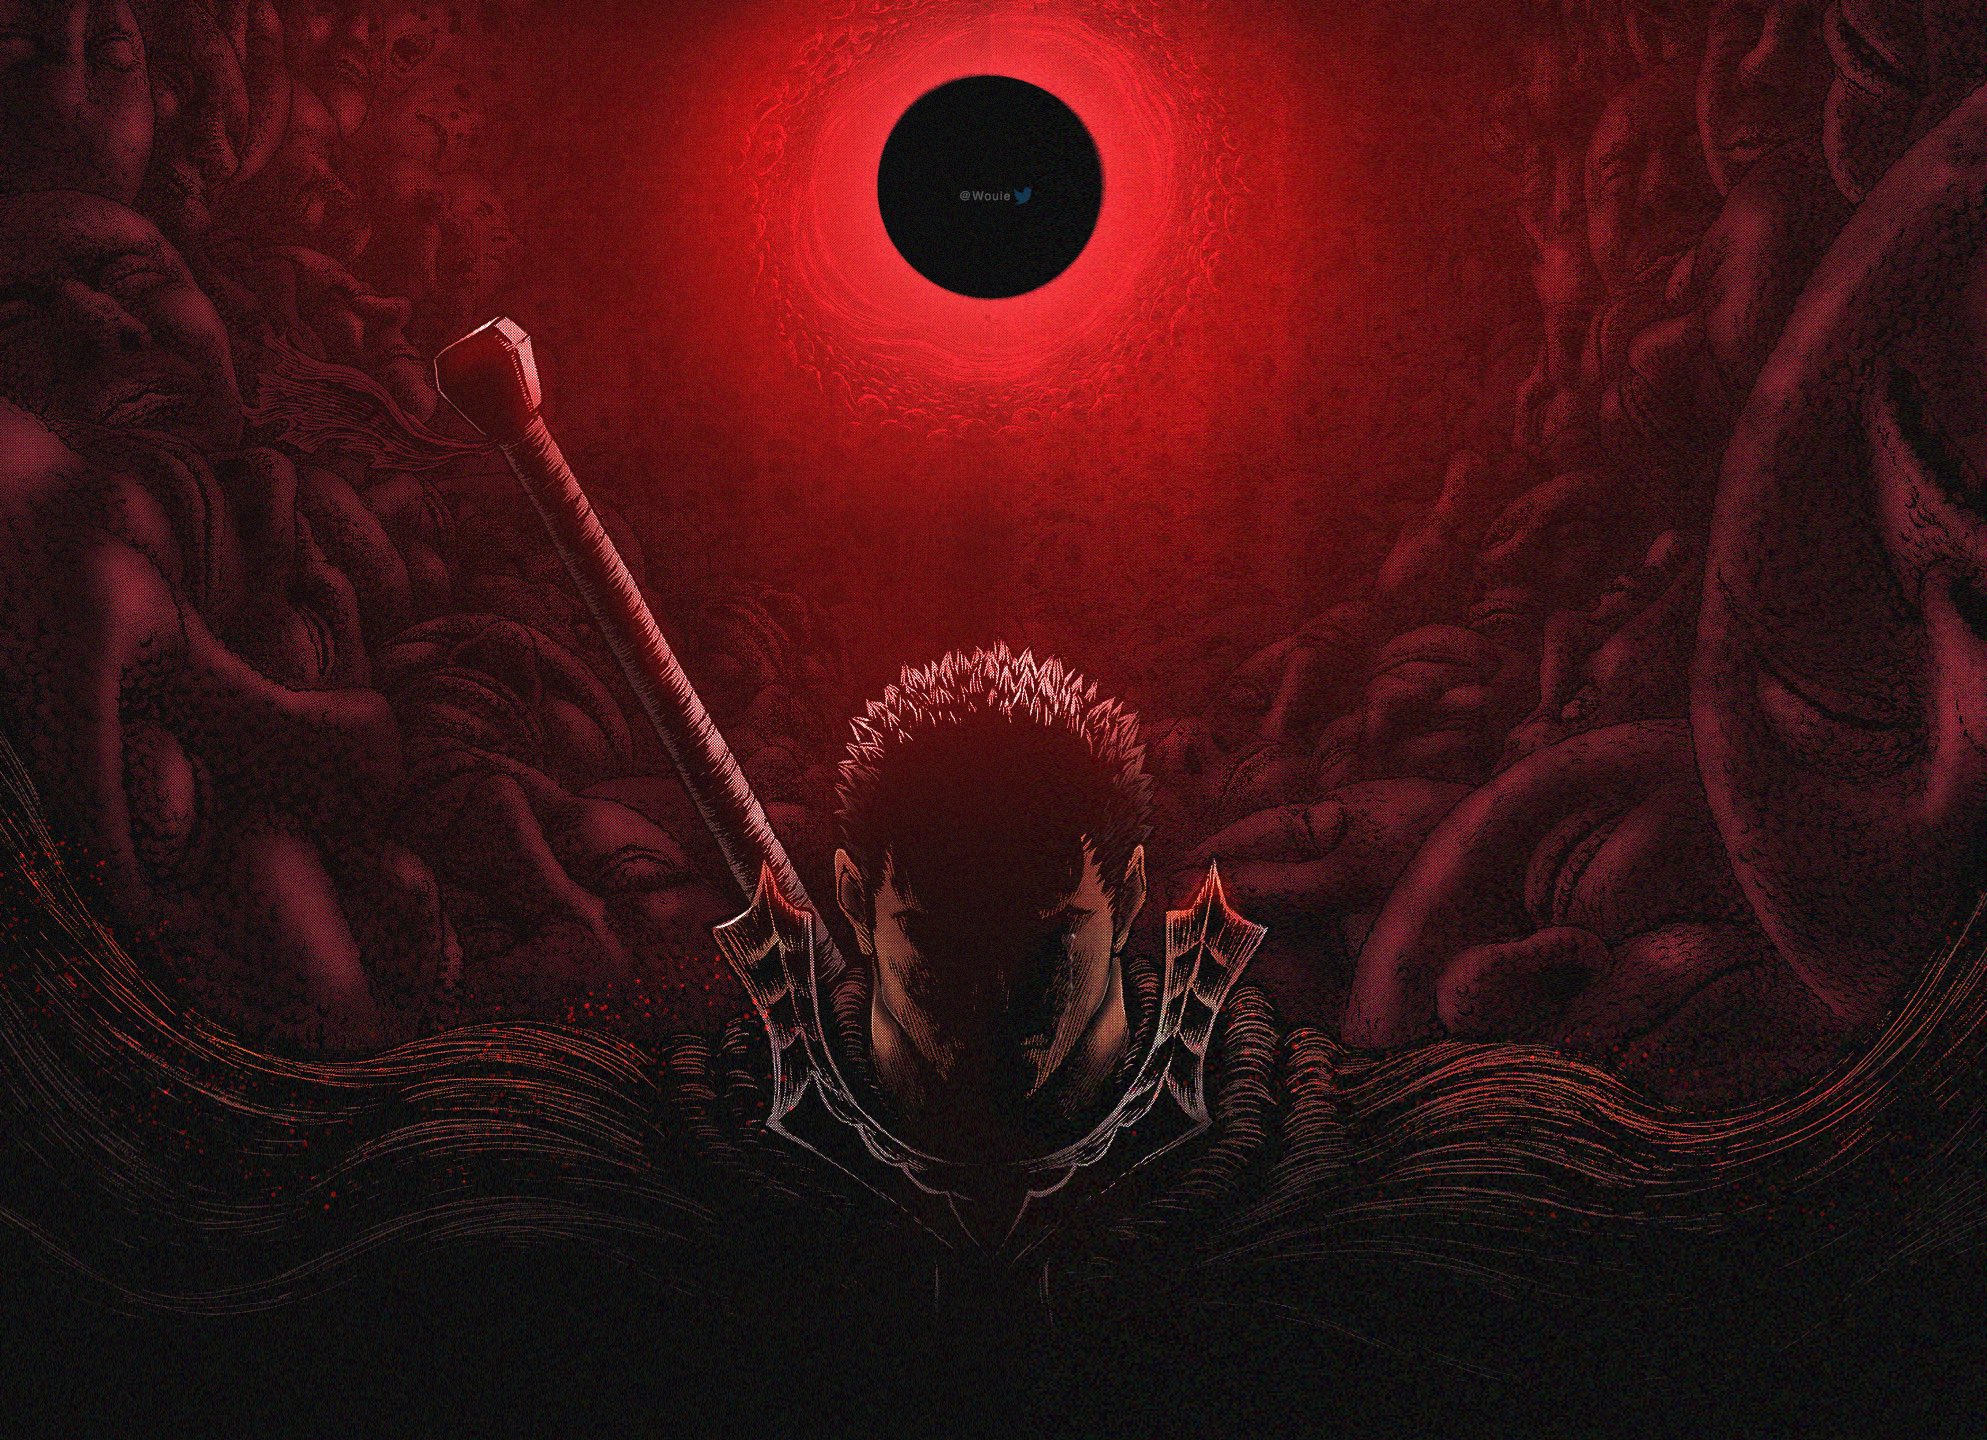 Berserk  Youre the only one by Dennis DiMaggio on Dribbble